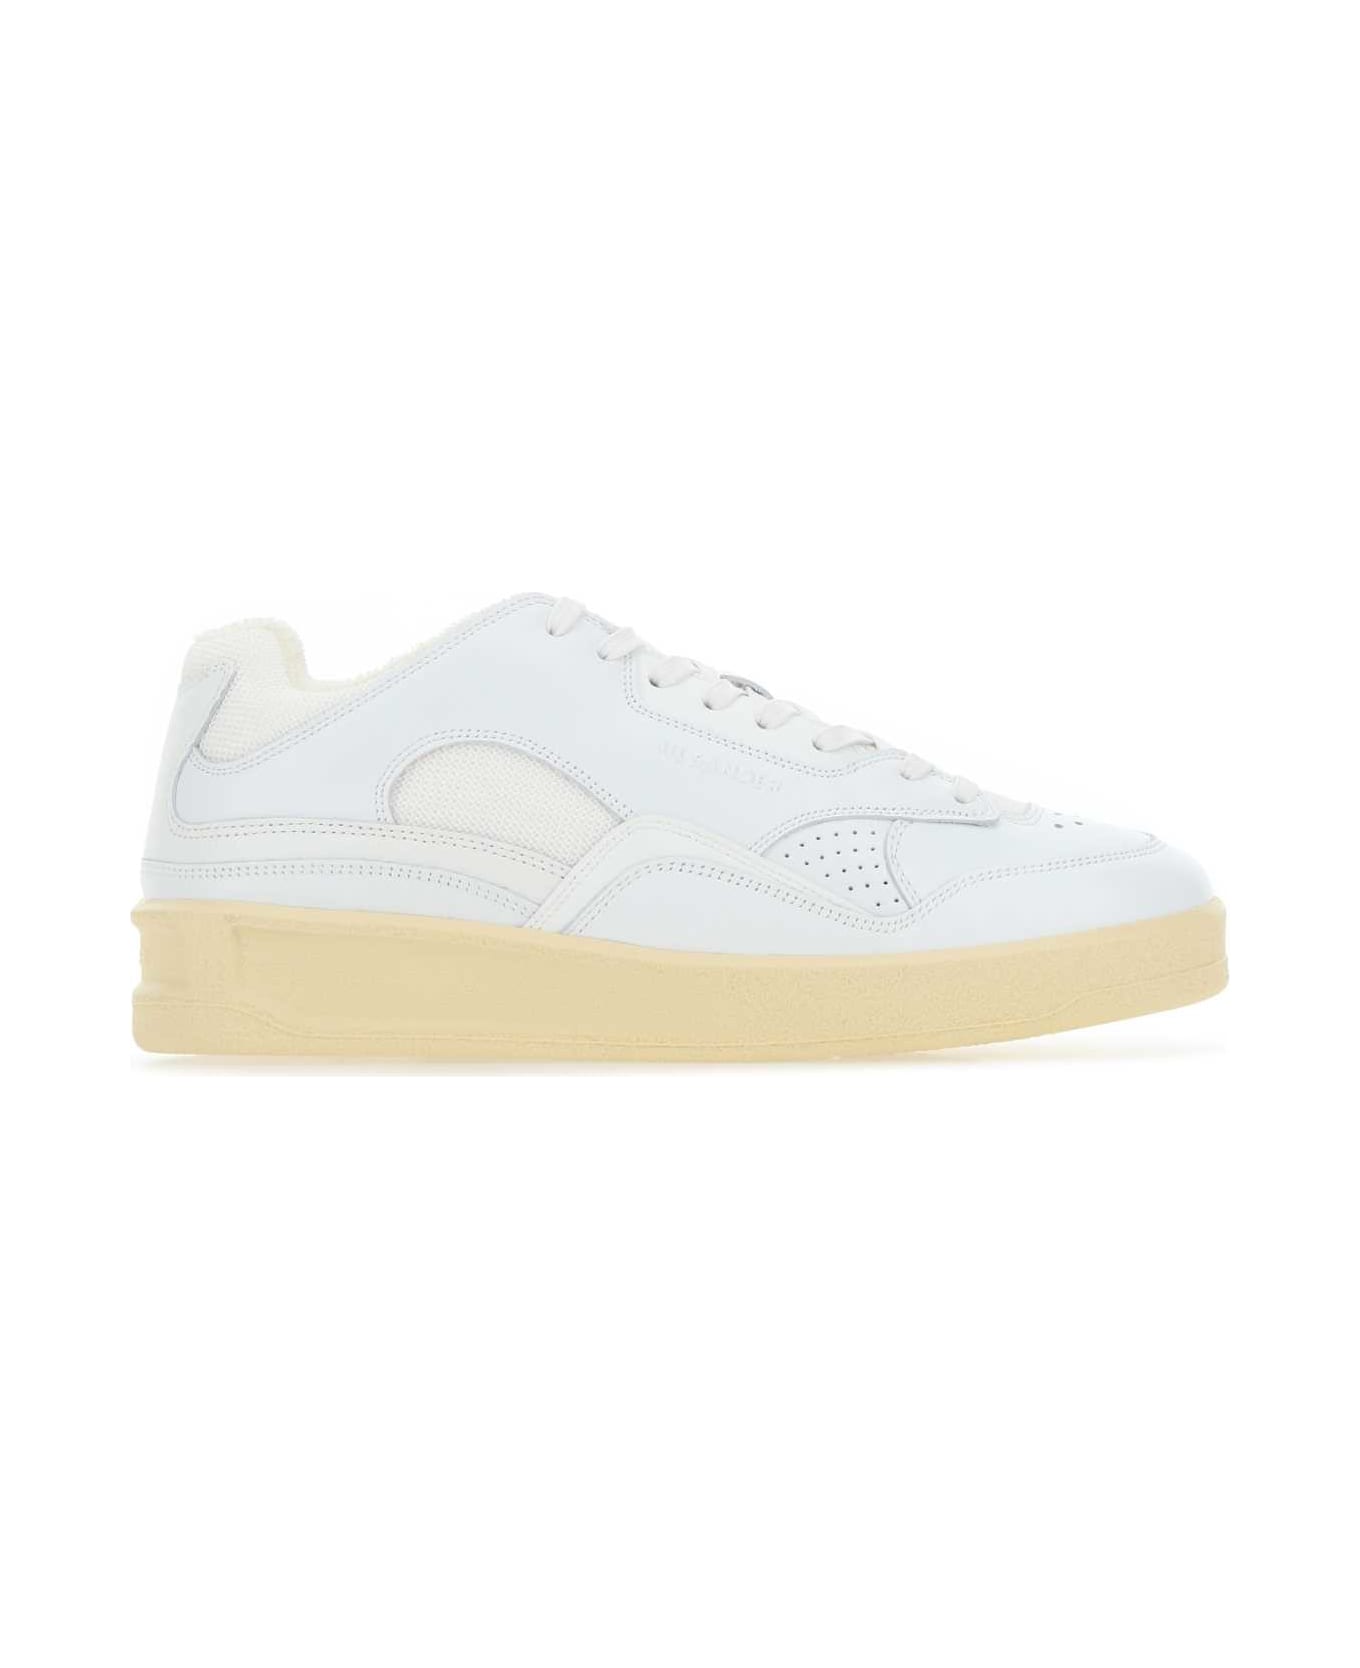 Jil Sander White Leather And Fabric Basket Sneakers - 100 スニーカー